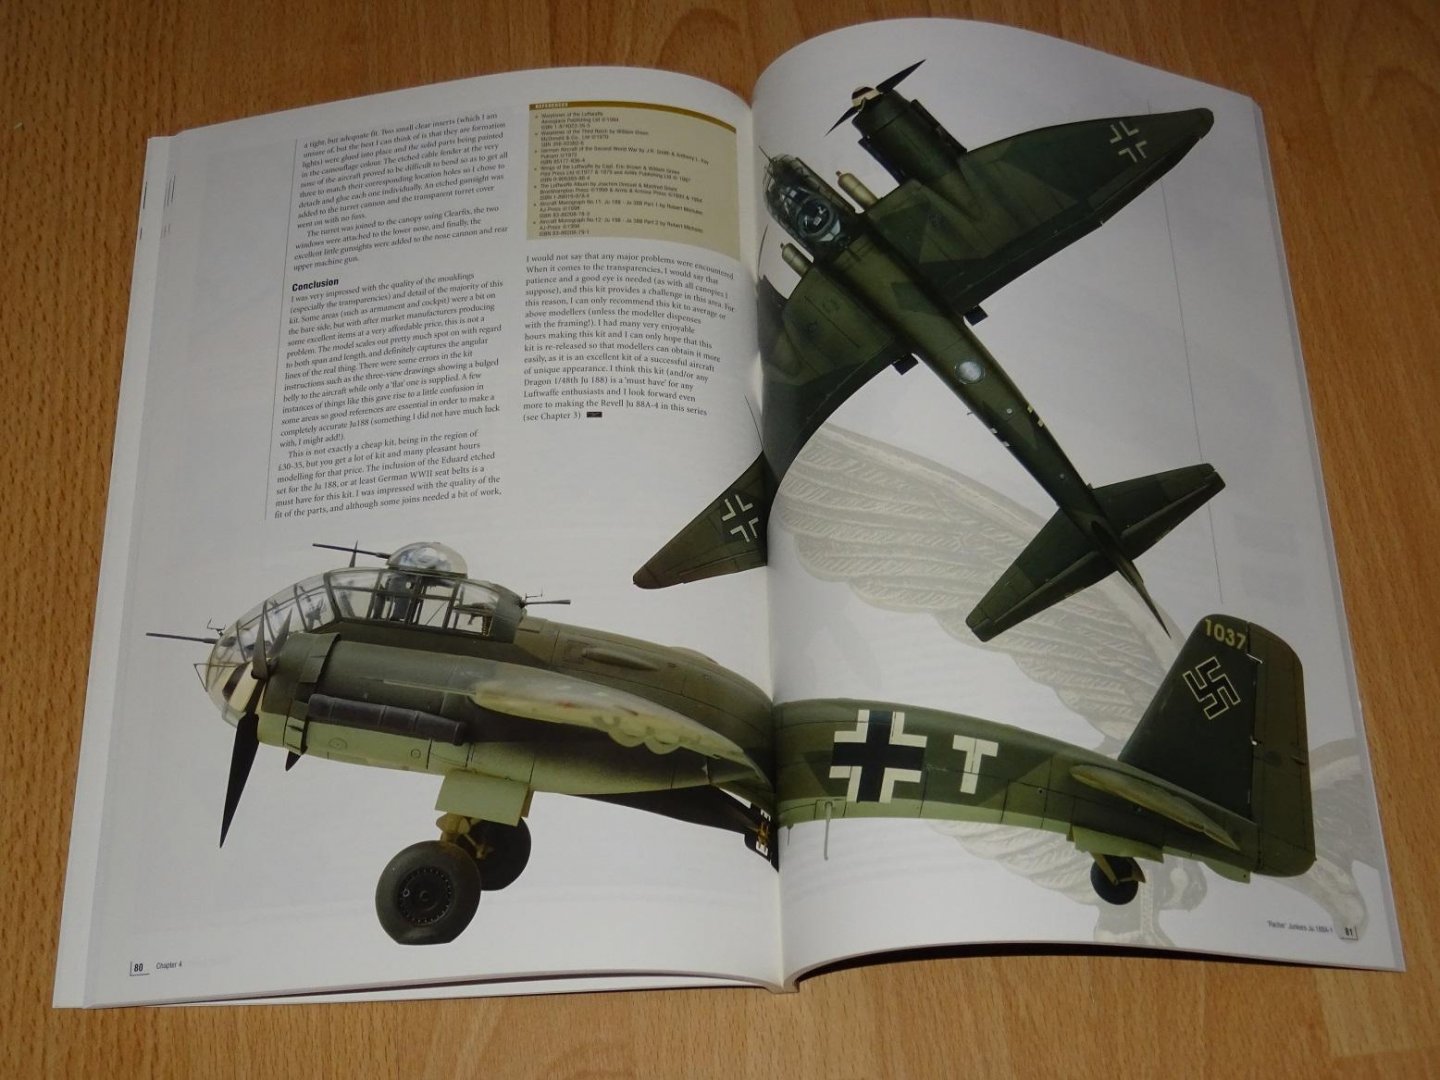 Wigman, Nicholas J. - Eagle's Wings : Modelling the Aircraft of the Luftwaffe in 1/48th Scale (volume 1)